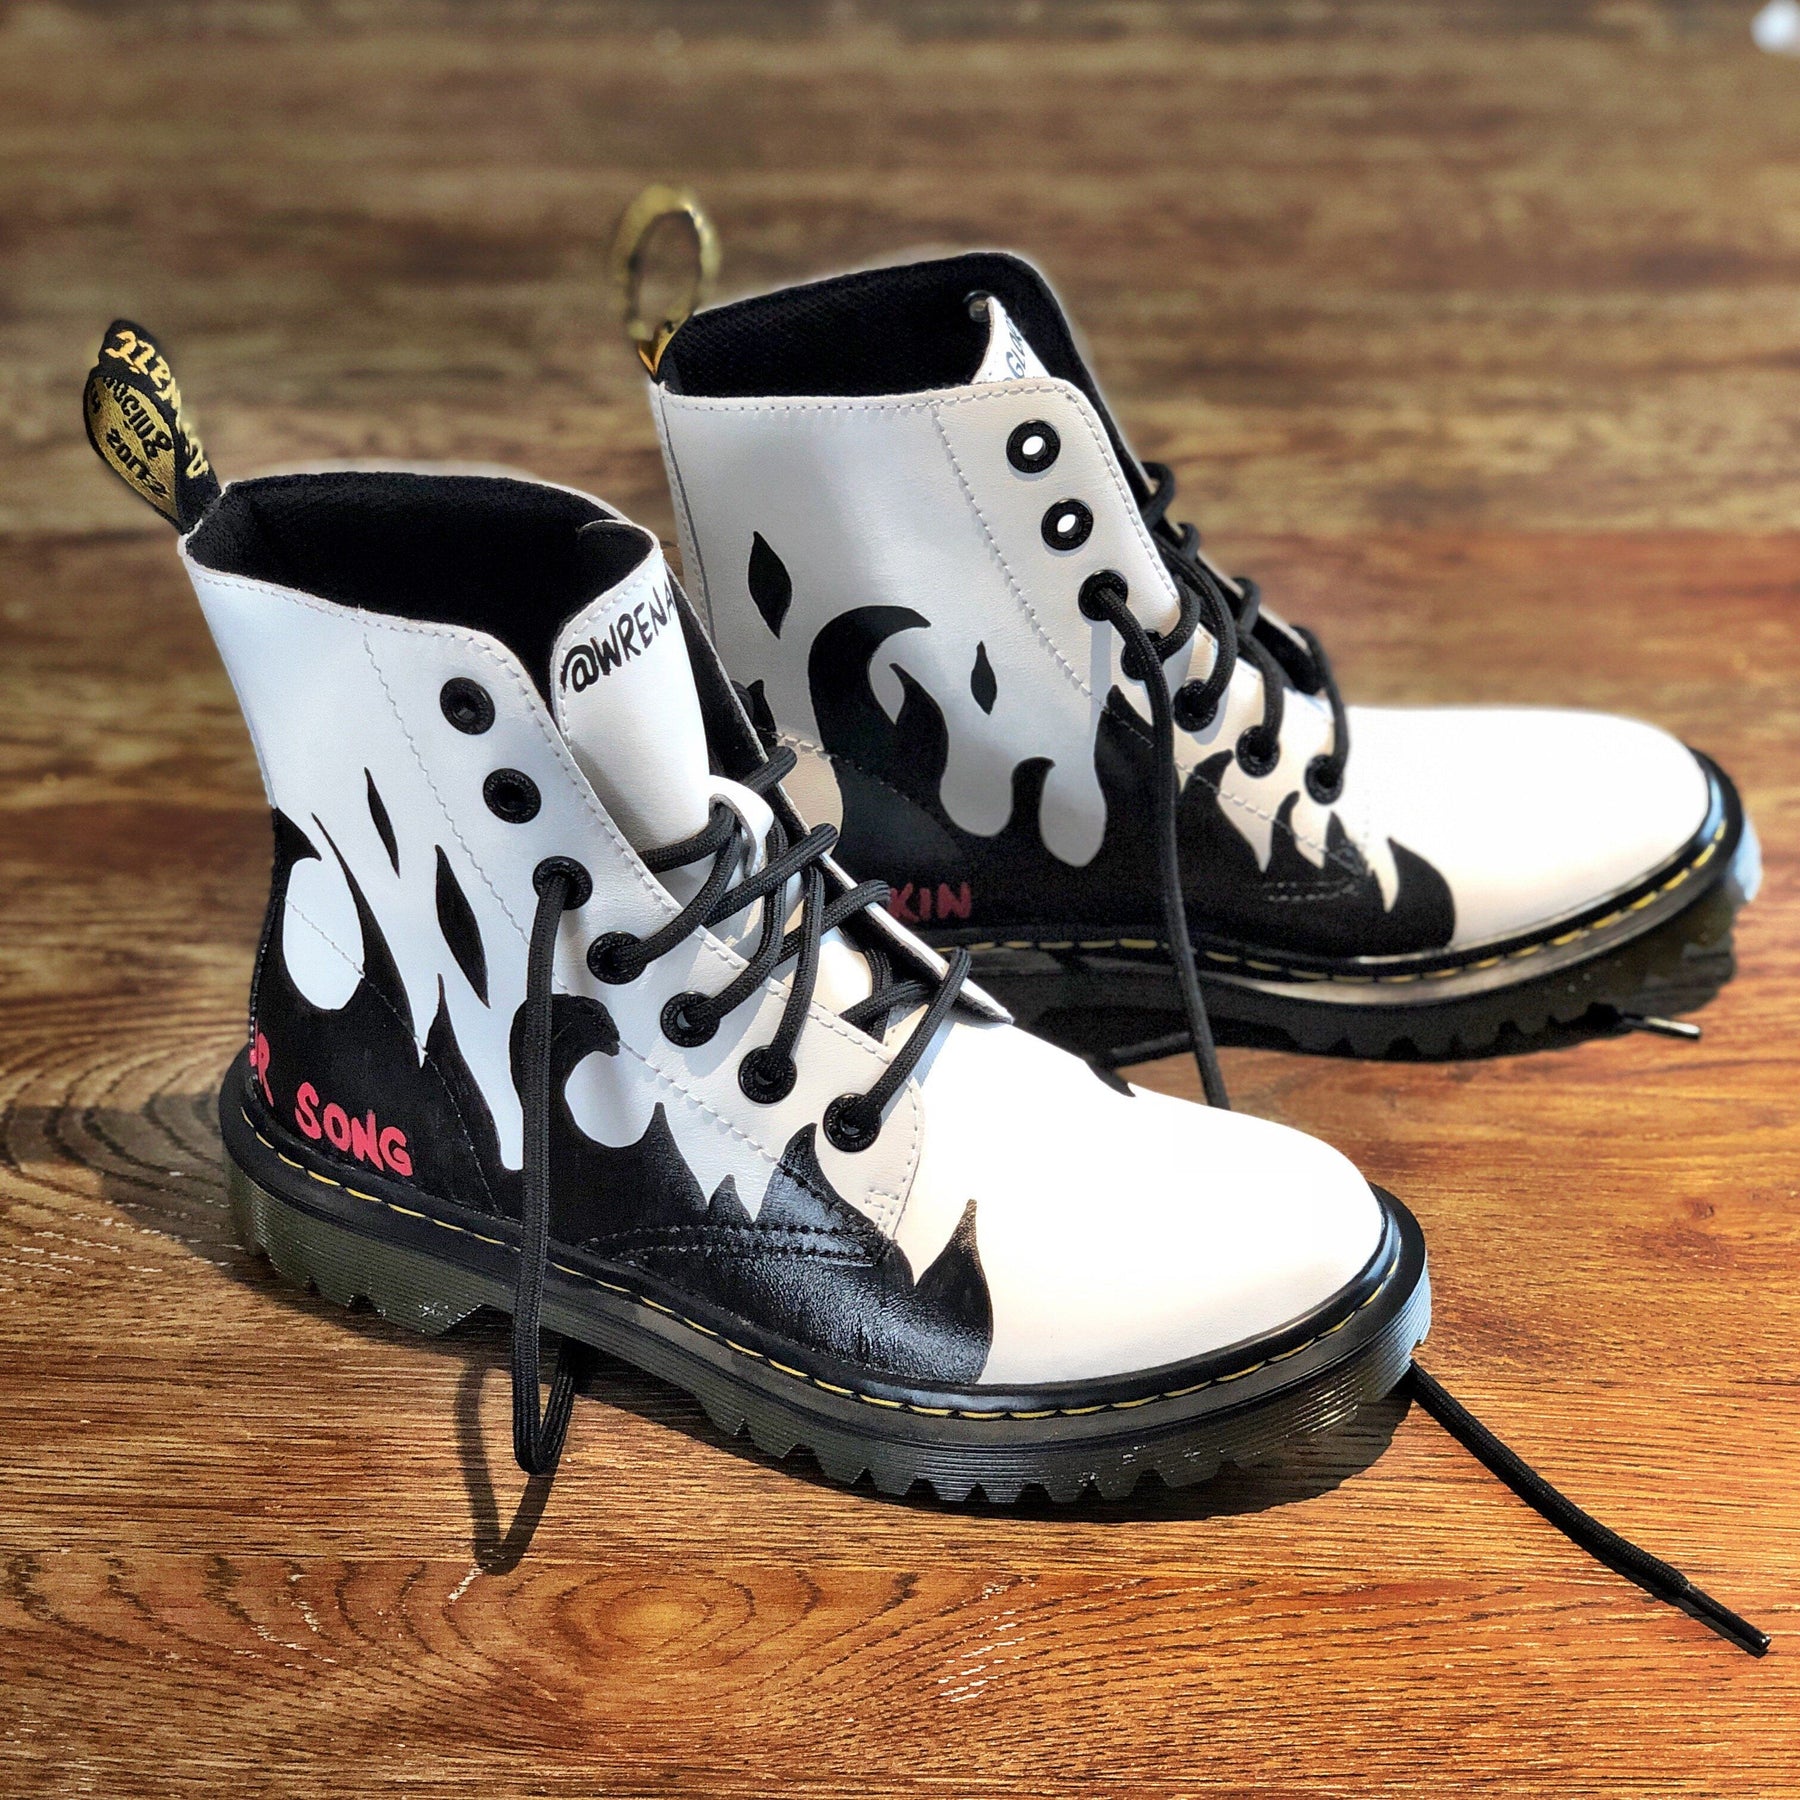 Black flames painted along the entire bottom of boots, with the words 'now you're walkin' painted in small font on one, and 'hummin your song' painted in small font on the other (in red on both). Painted on white Dr Marten boots.